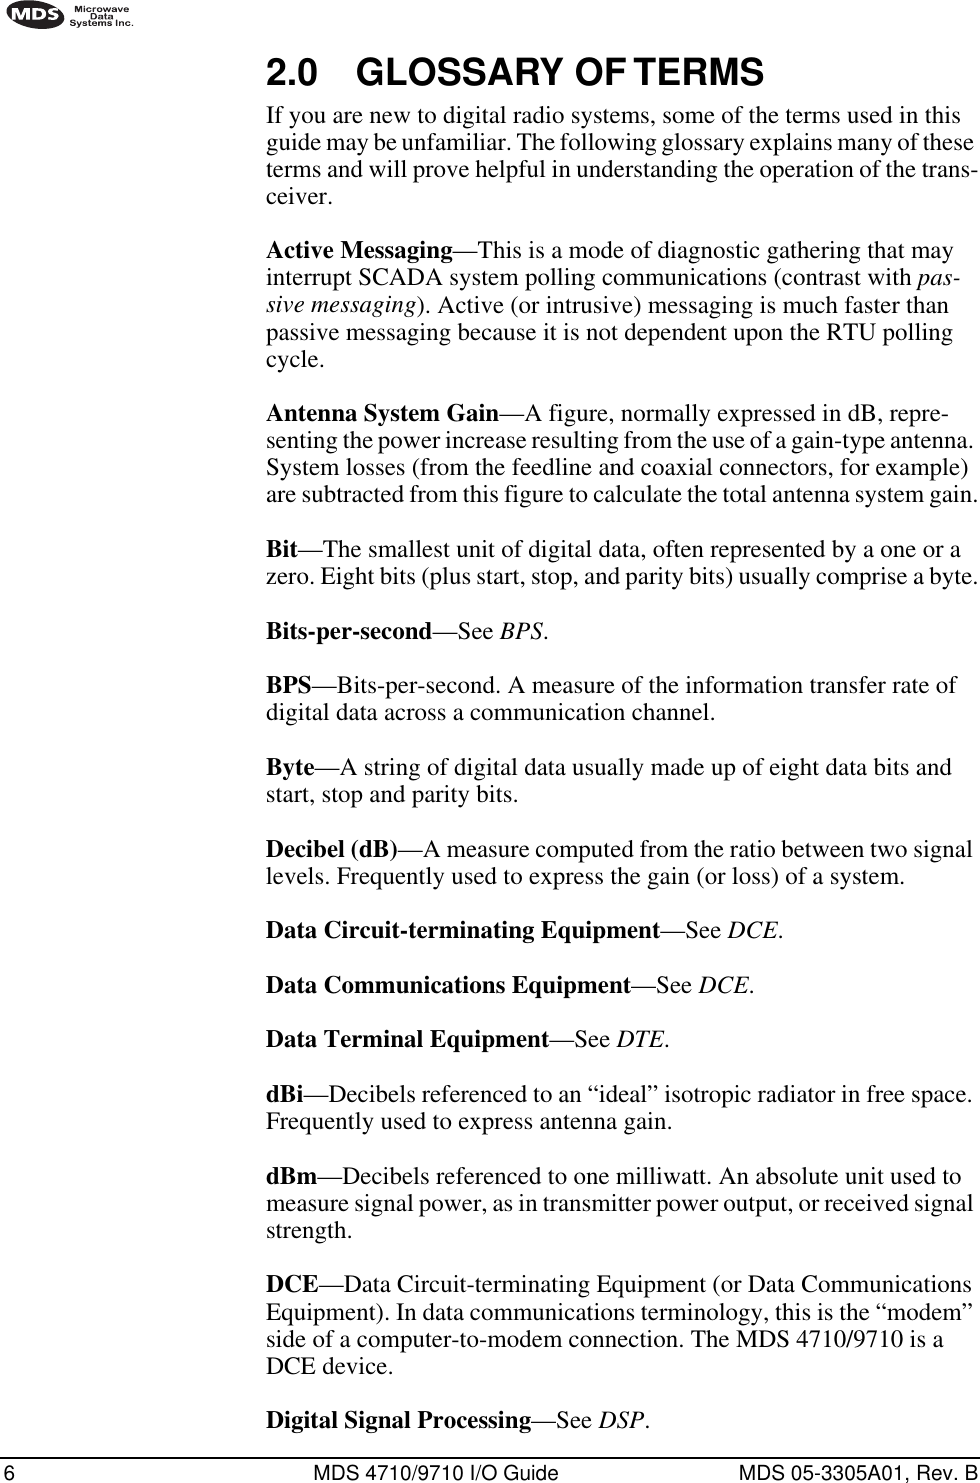  6 MDS 4710/9710 I/O Guide MDS 05-3305A01, Rev. B        2.0 GLOSSARY OF TERMS If you are new to digital radio systems, some of the terms used in this guide may be unfamiliar. The following glossary explains many of these terms and will prove helpful in understanding the operation of the trans-ceiver. Active Messaging —This is a mode of diagnostic gathering that may interrupt SCADA system polling communications (contrast with  pas-sive messaging ). Active (or intrusive) messaging is much faster than passive messaging because it is not dependent upon the RTU polling cycle. Antenna System Gain —A figure, normally expressed in dB, repre-senting the power increase resulting from the use of a gain-type antenna. System losses (from the feedline and coaxial connectors, for example) are subtracted from this figure to calculate the total antenna system gain. Bit —The smallest unit of digital data, often represented by a one or a zero. Eight bits (plus start, stop, and parity bits) usually comprise a byte. Bits-per-second —See  BPS . BPS —Bits-per-second. A measure of the information transfer rate of digital data across a communication channel. Byte —A string of digital data usually made up of eight data bits and start, stop and parity bits.Decibel (dB)—A measure computed from the ratio between two signal levels. Frequently used to express the gain (or loss) of a system.Data Circuit-terminating Equipment—See DCE.Data Communications Equipment—See DCE.Data Terminal Equipment—See DTE.dBi—Decibels referenced to an “ideal” isotropic radiator in free space. Frequently used to express antenna gain.dBm—Decibels referenced to one milliwatt. An absolute unit used to measure signal power, as in transmitter power output, or received signal strength.DCE—Data Circuit-terminating Equipment (or Data Communications Equipment). In data communications terminology, this is the “modem” side of a computer-to-modem connection. The MDS 4710/9710 is a DCE device.Digital Signal Processing—See DSP.